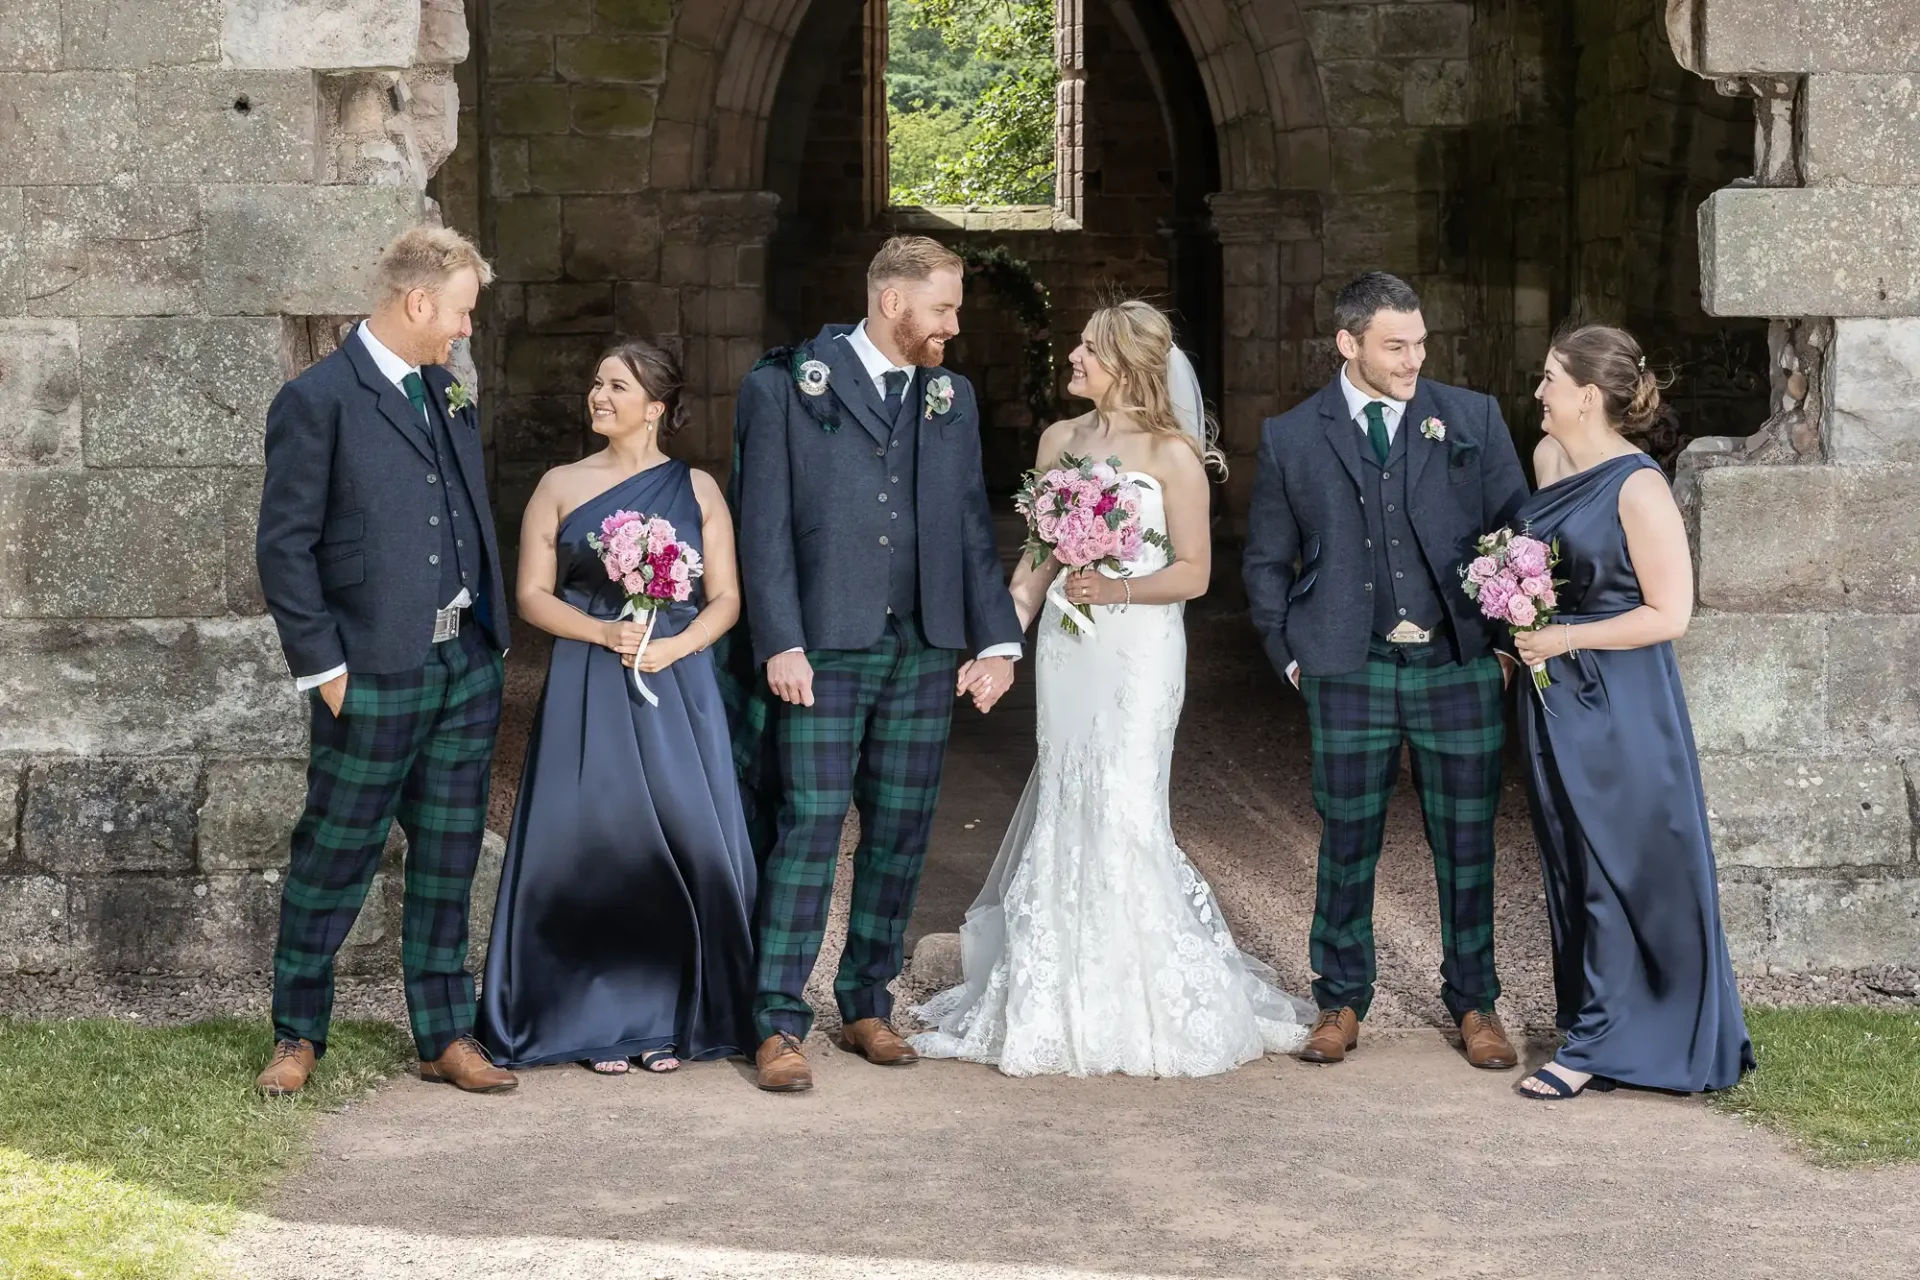 A wedding party of three couples, the men in tartan kilts and tweed jackets, and the women in blue dresses, posing in a stone archway.